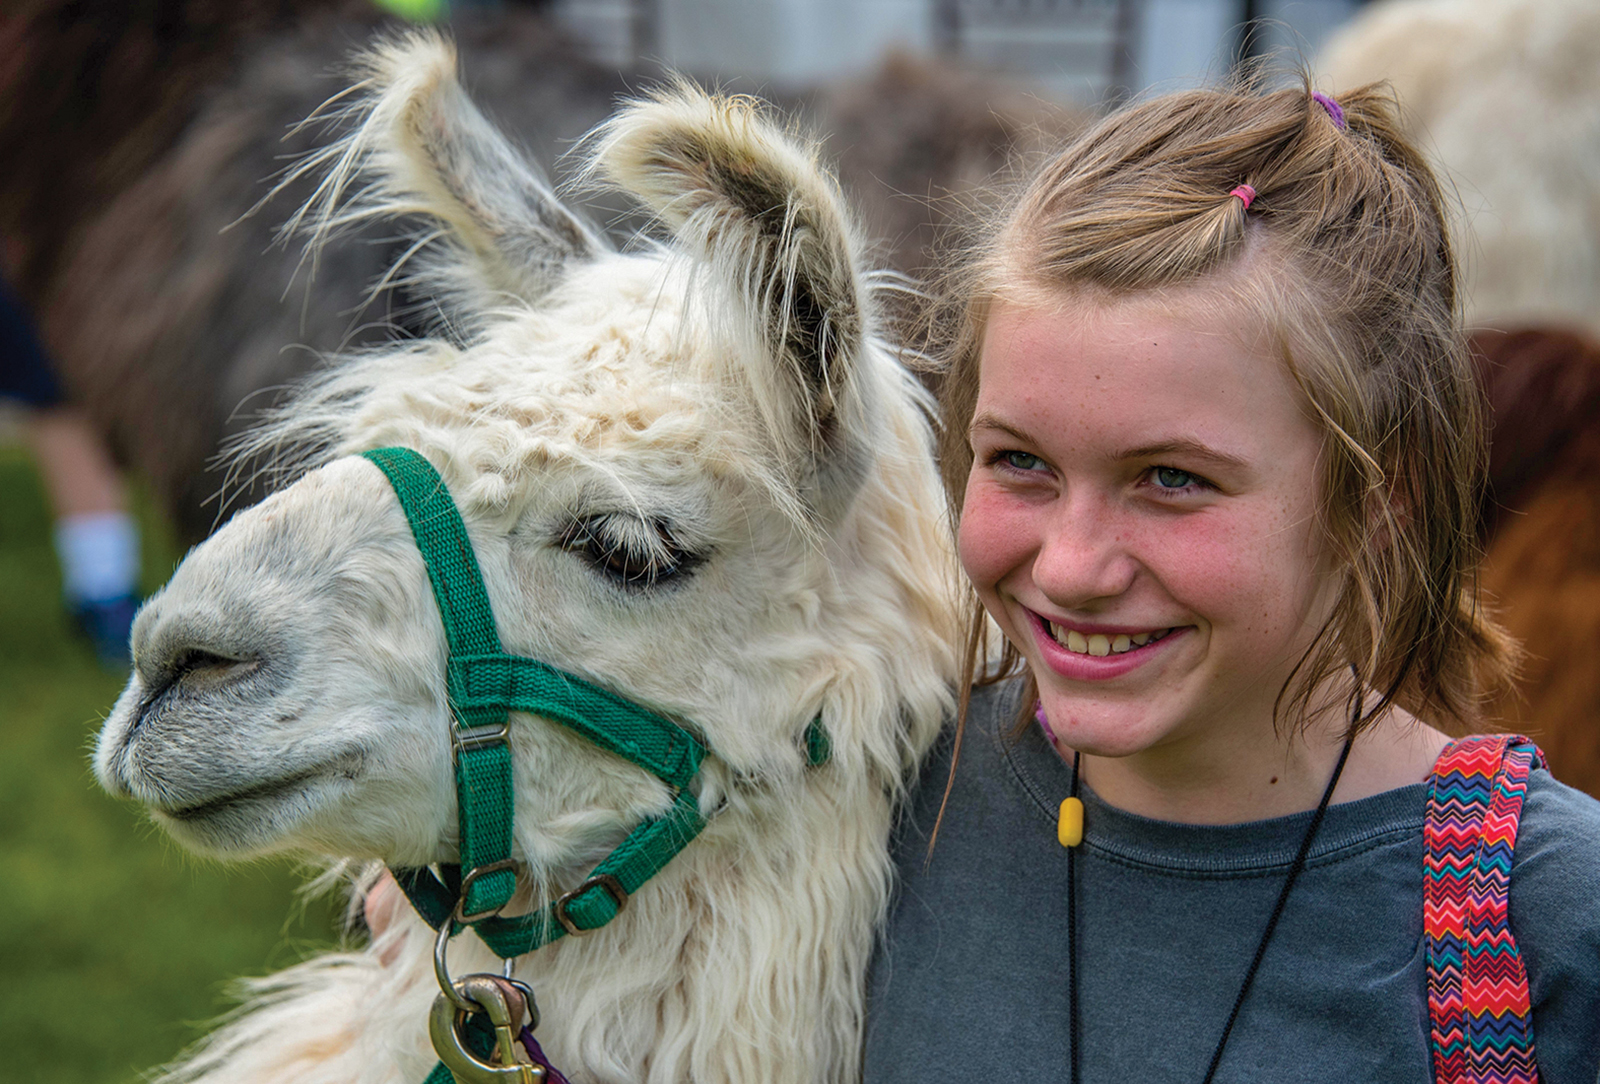 Jaida and her favorite llama friend, Lightning - Big Brother and Big Sisters of Highlands-Cashiers